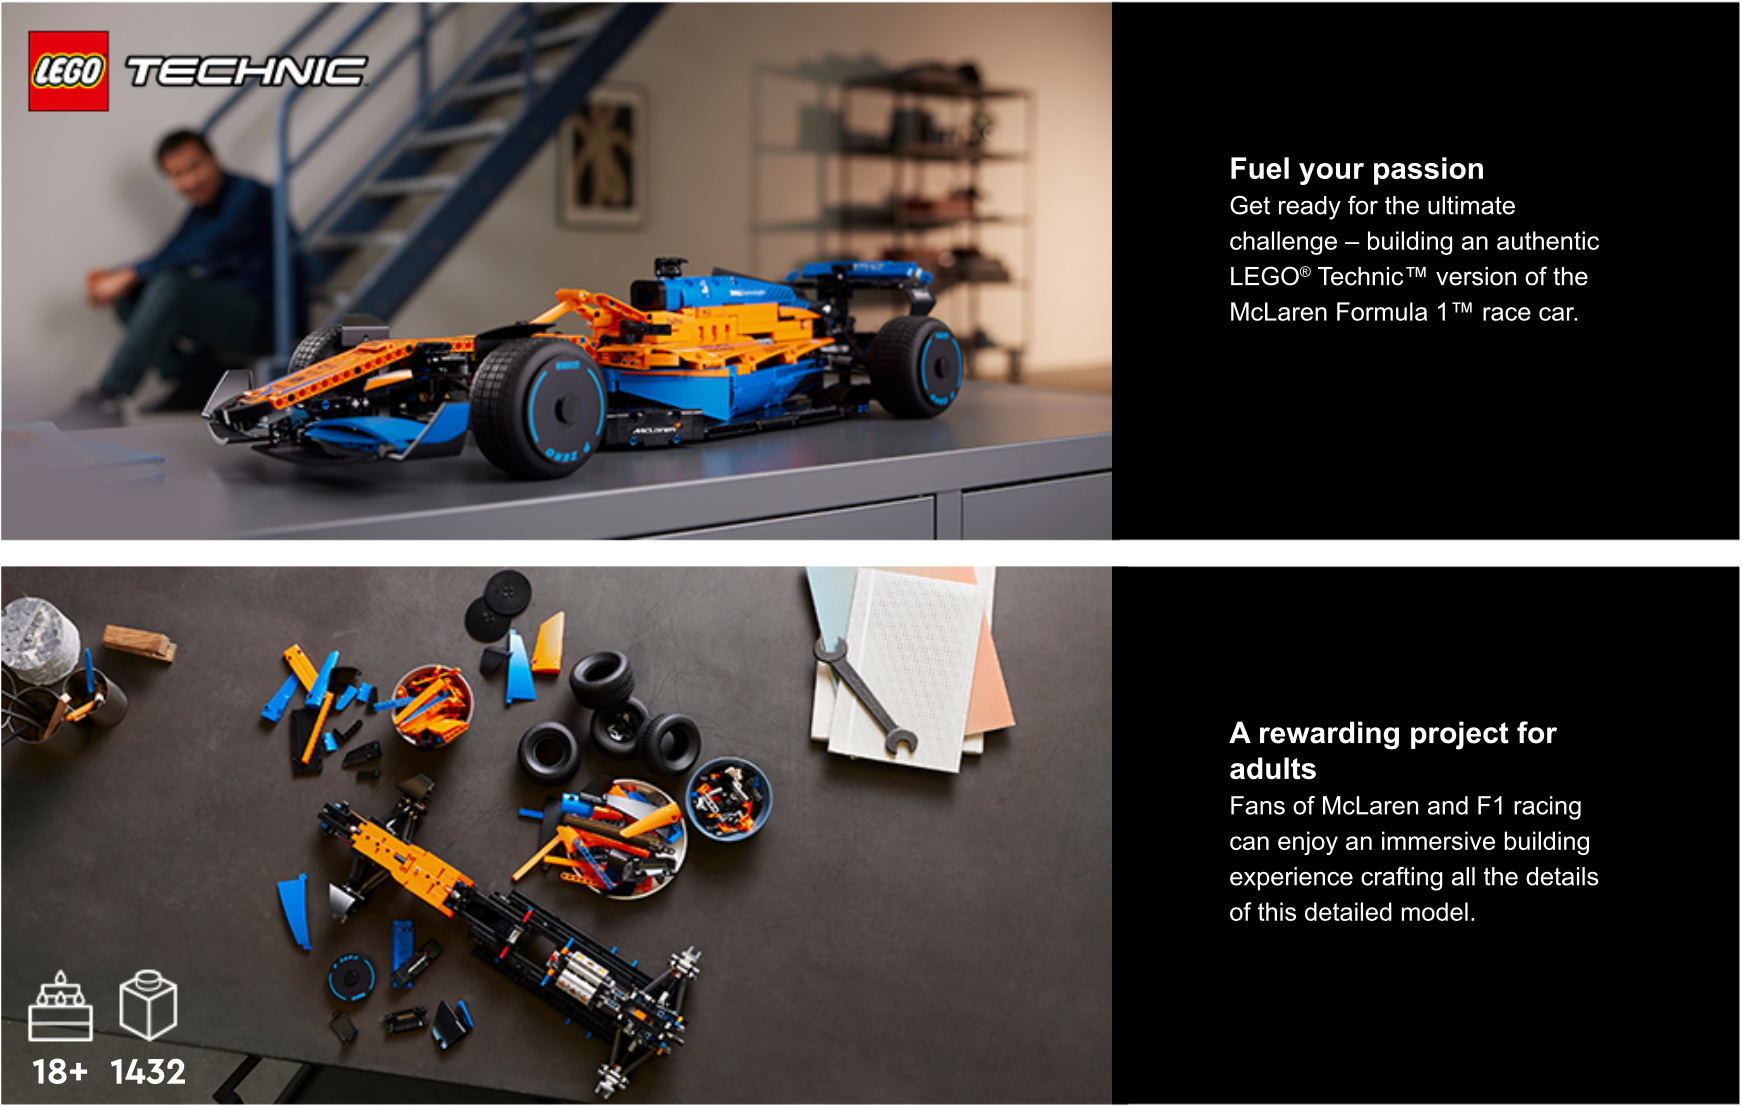 This new Lego Technic set is our first look at the 2022 McLaren F1 car